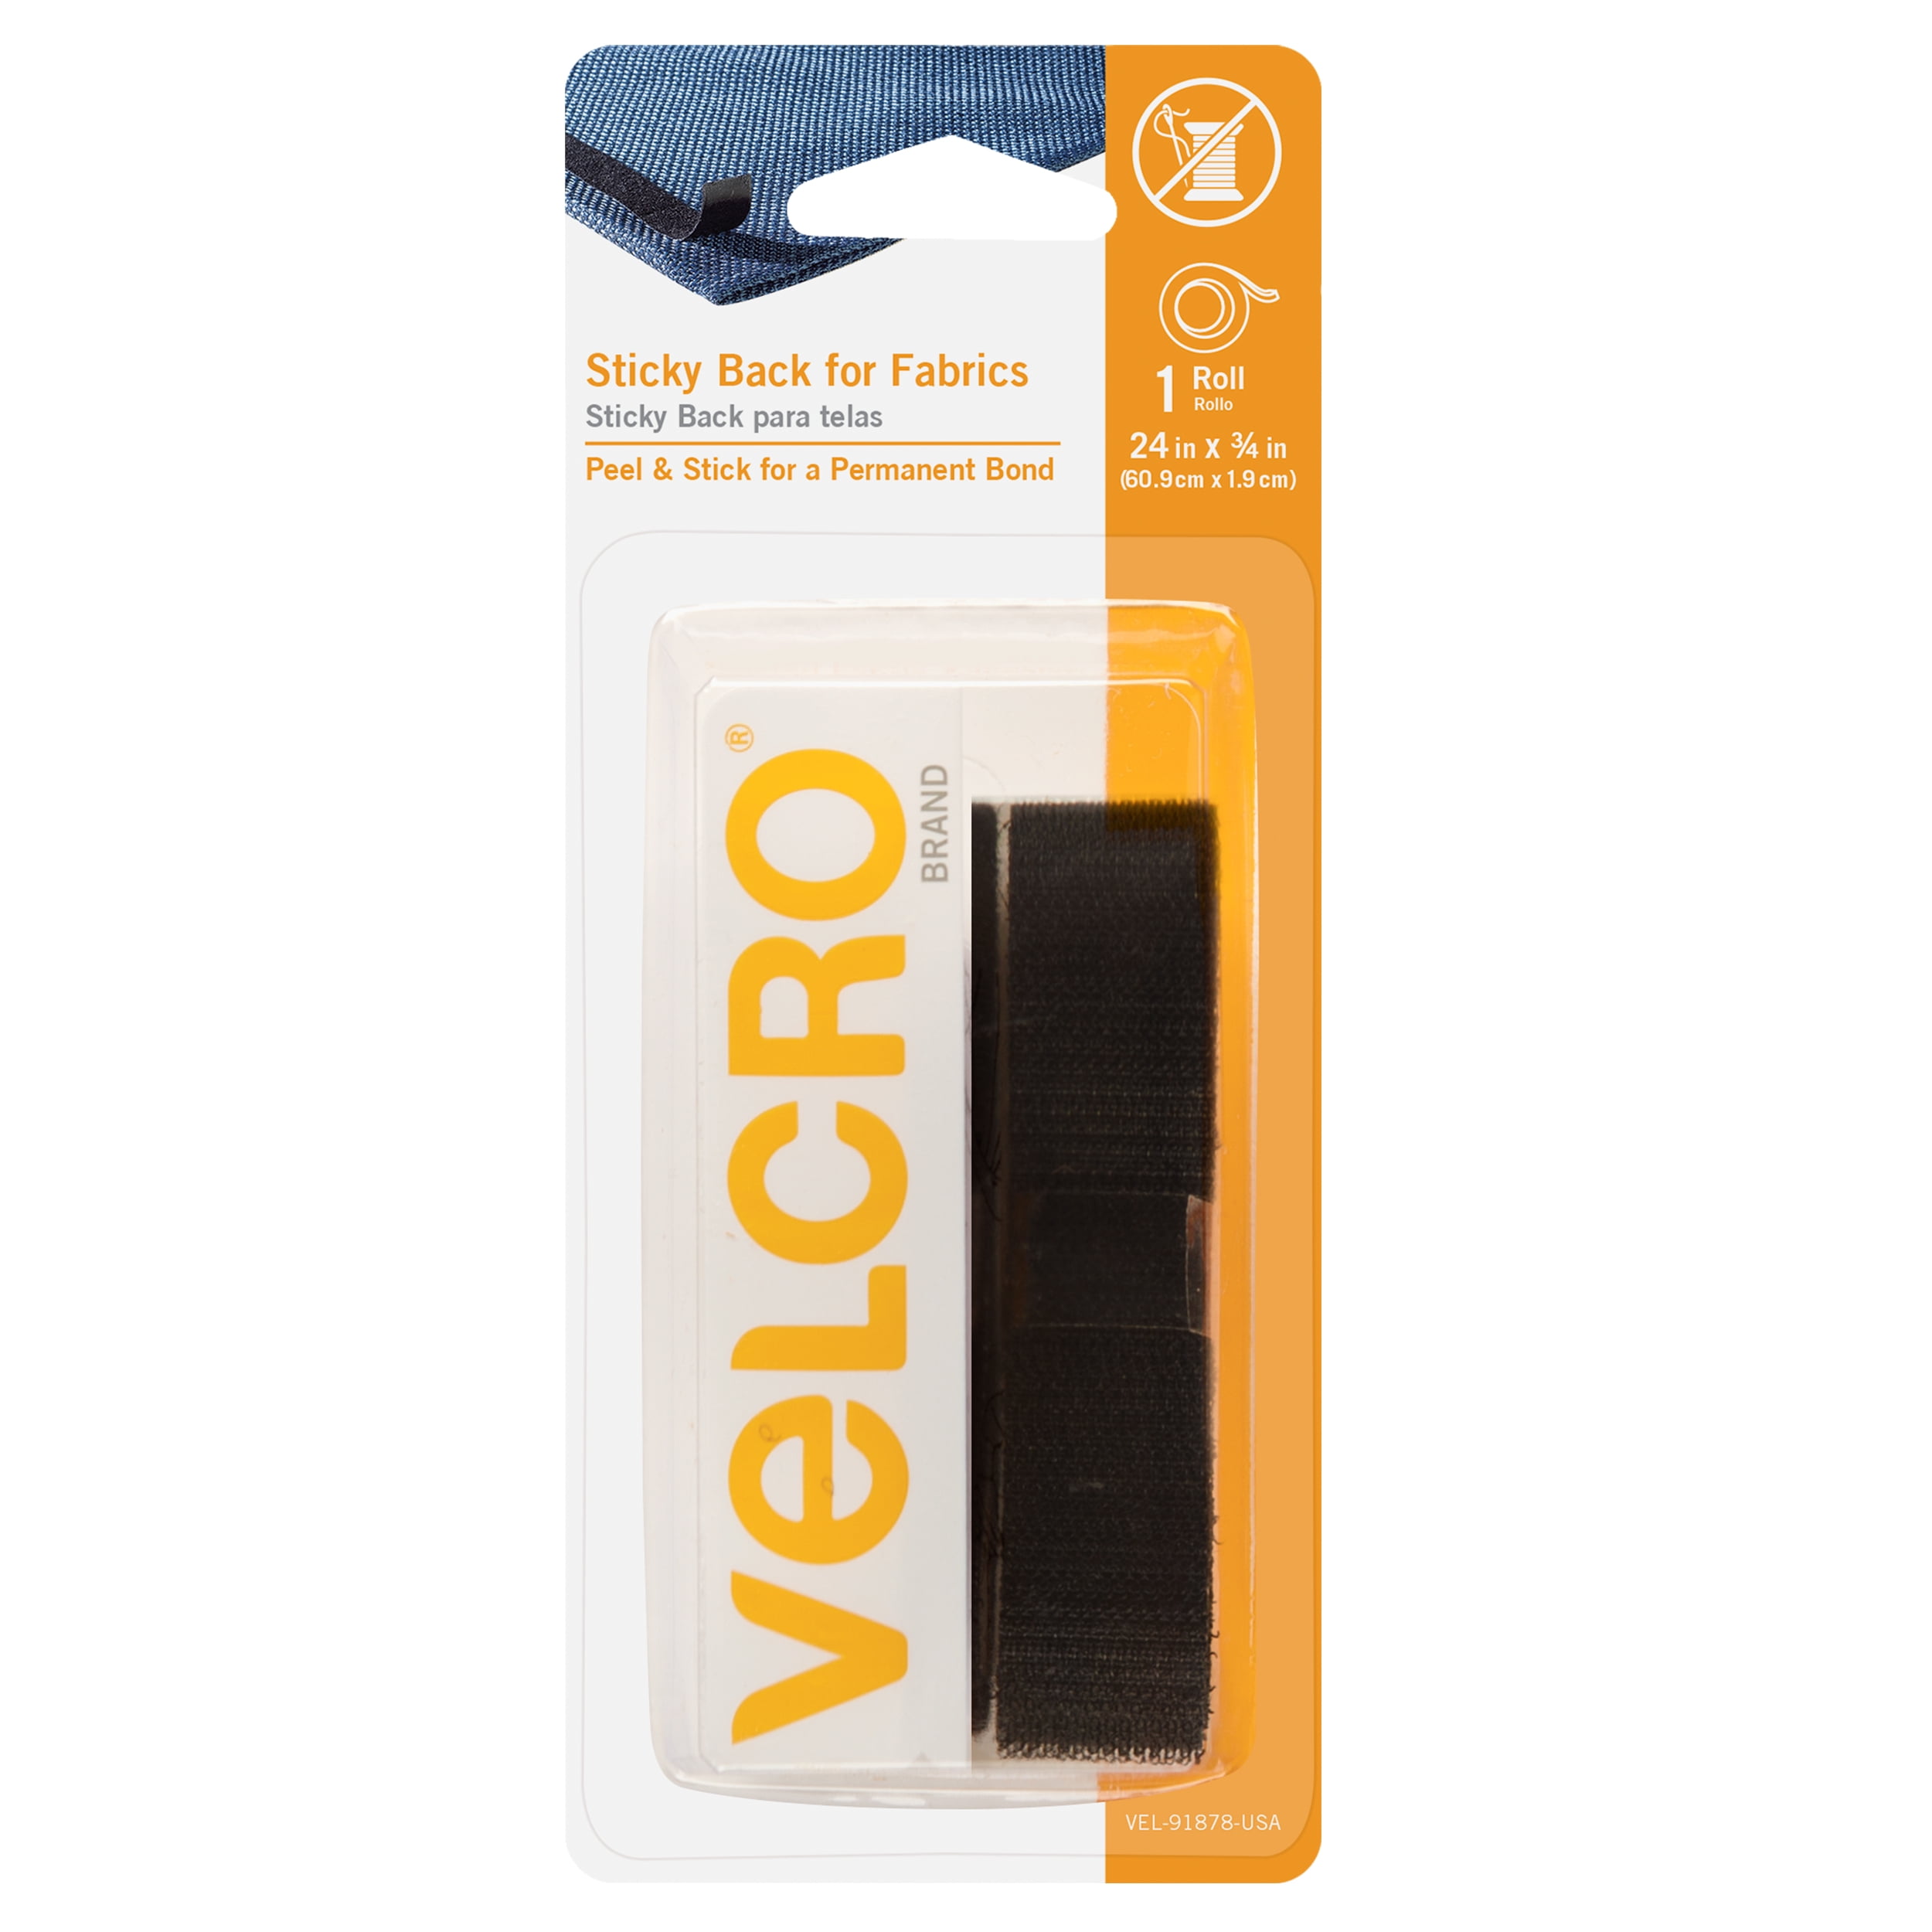 VELCRO For Fabrics | Sew On Fabric Tape for Alterations and Hemming | No Ironing Gluing | Ideal Substitute for Snaps and Buttons | x Roll Black - Walmart.com